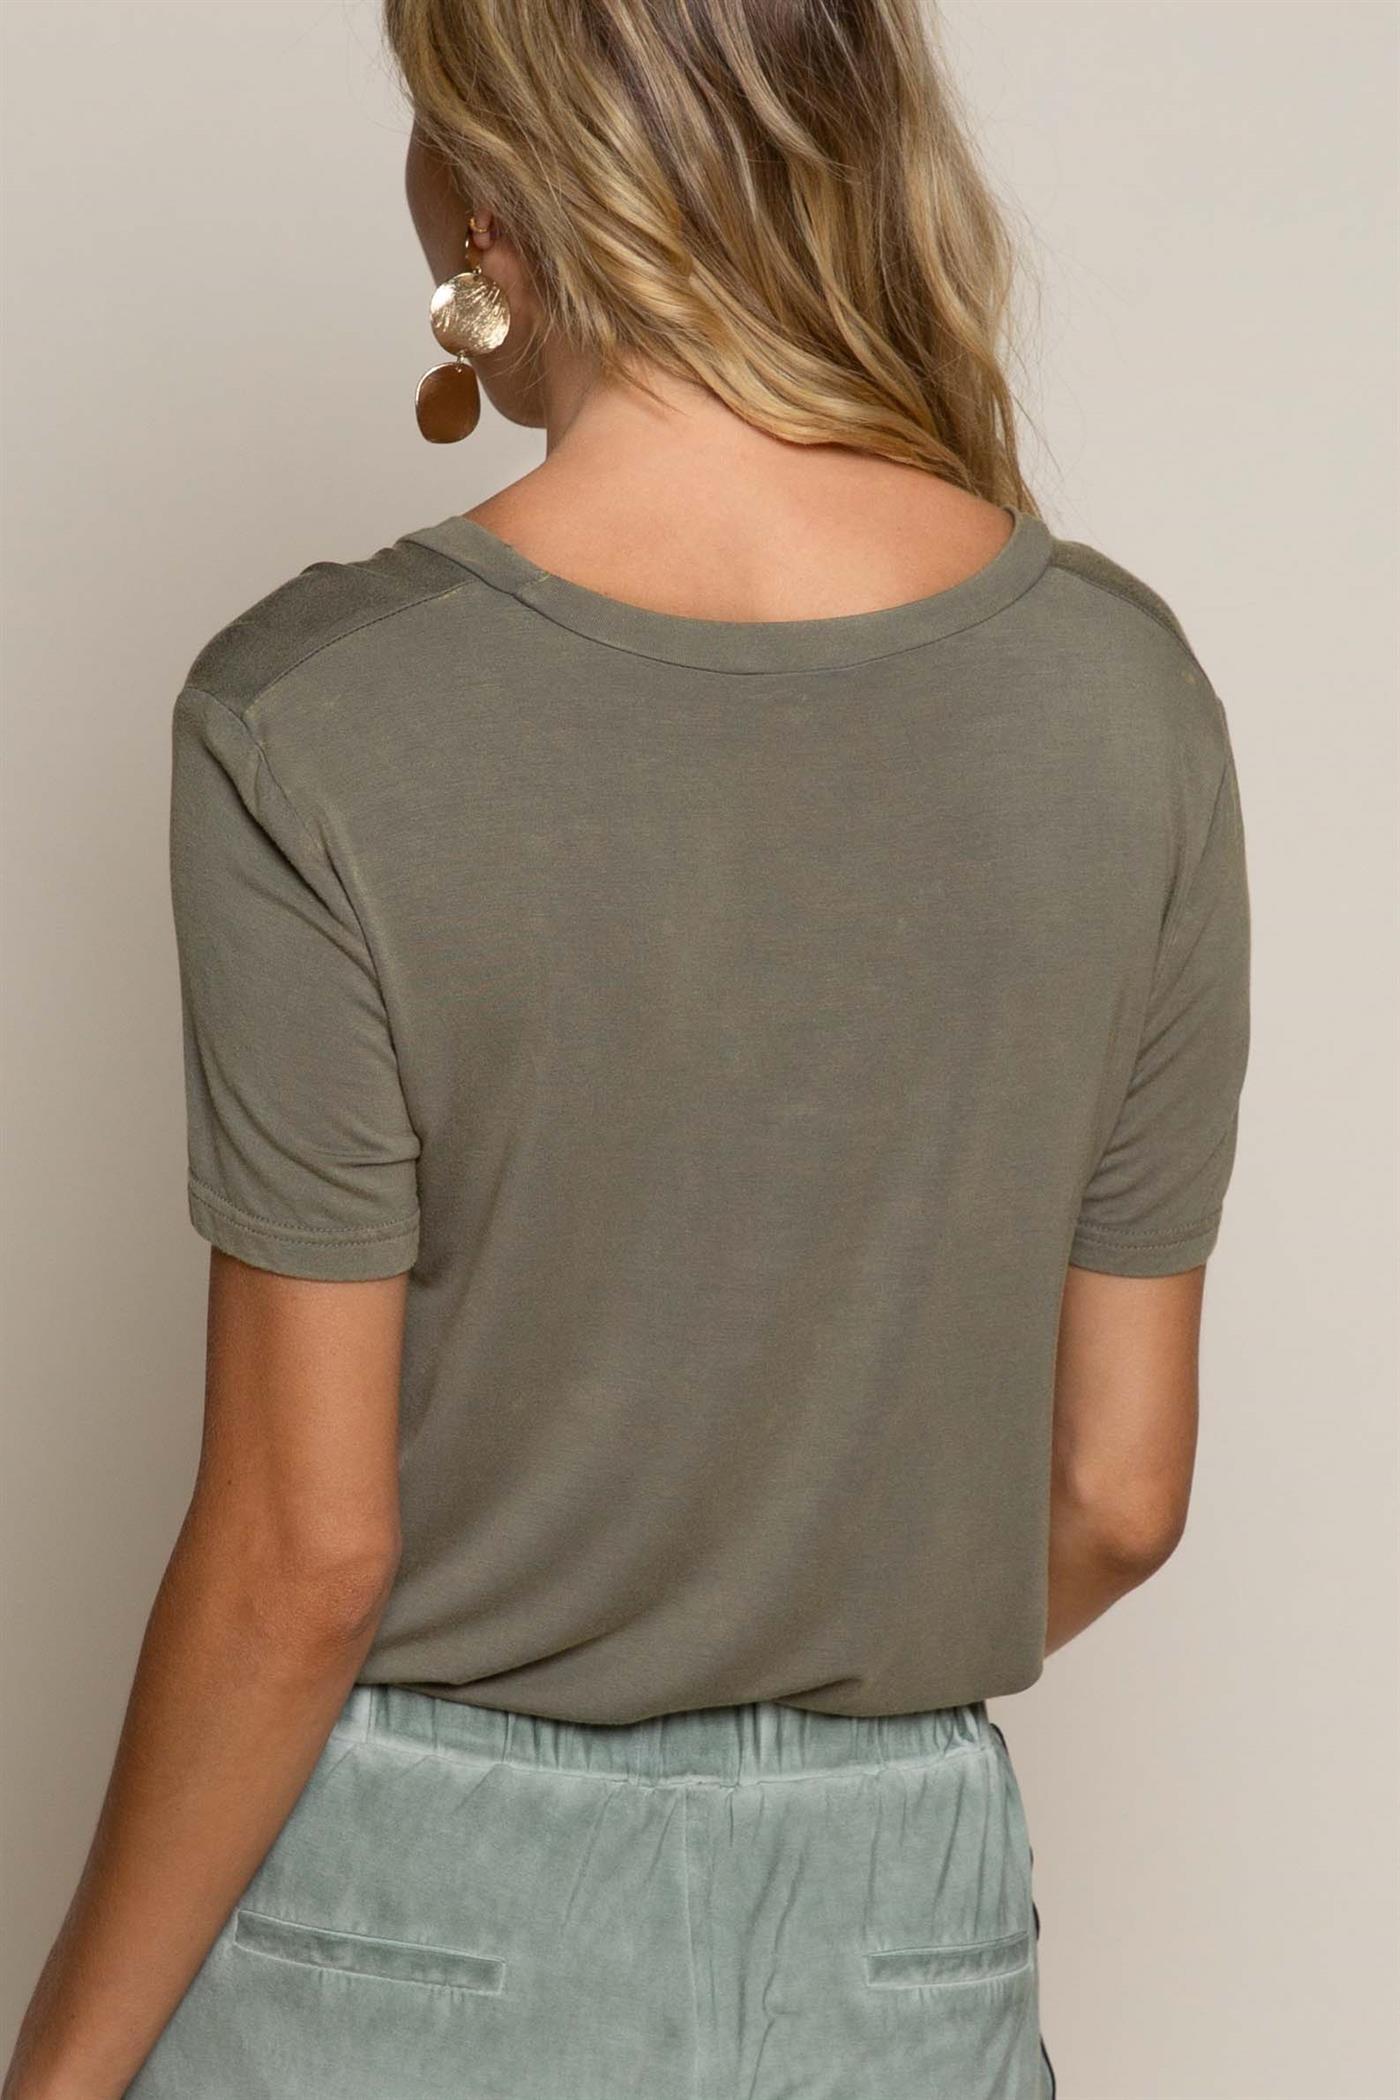 Butter Soft Scoop Neck Tee in Olive